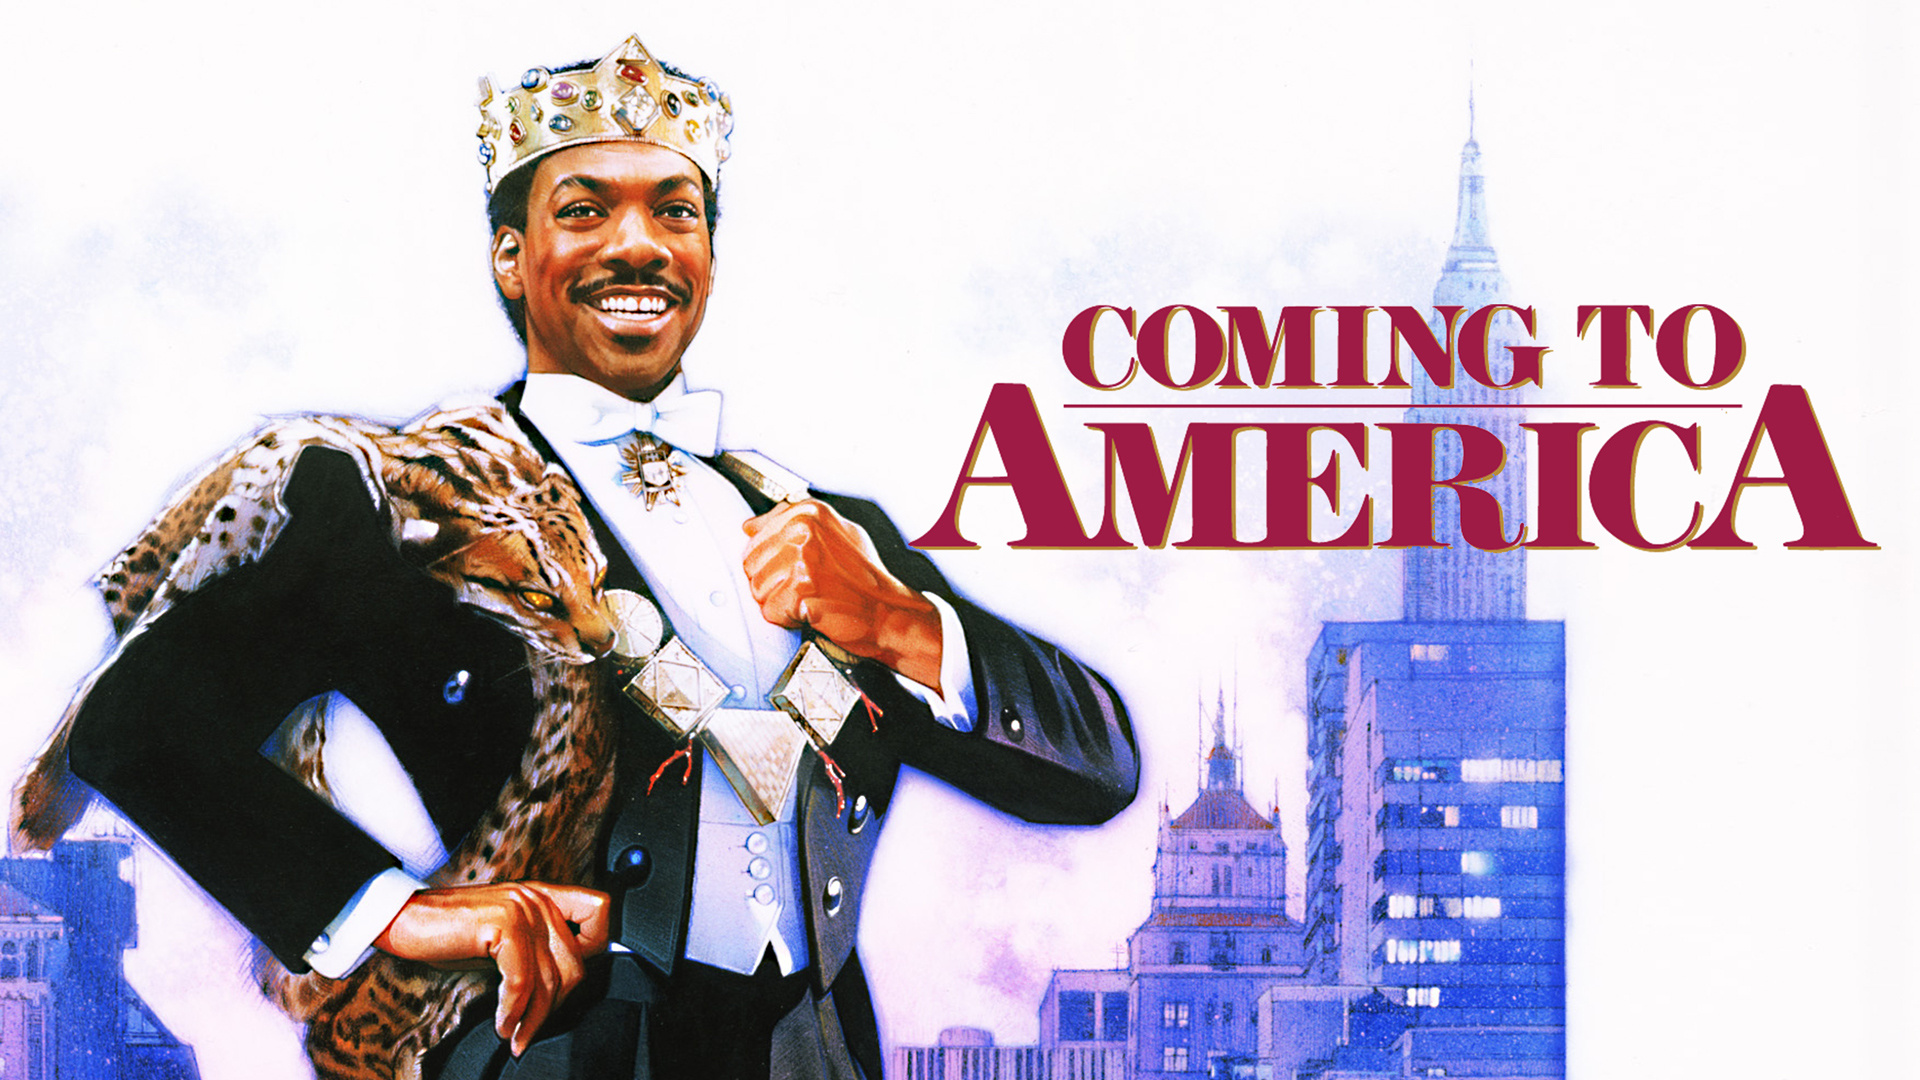 Coming to America movie, Hilarious comedy, Secret prince, African adventure, 1920x1080 Full HD Desktop